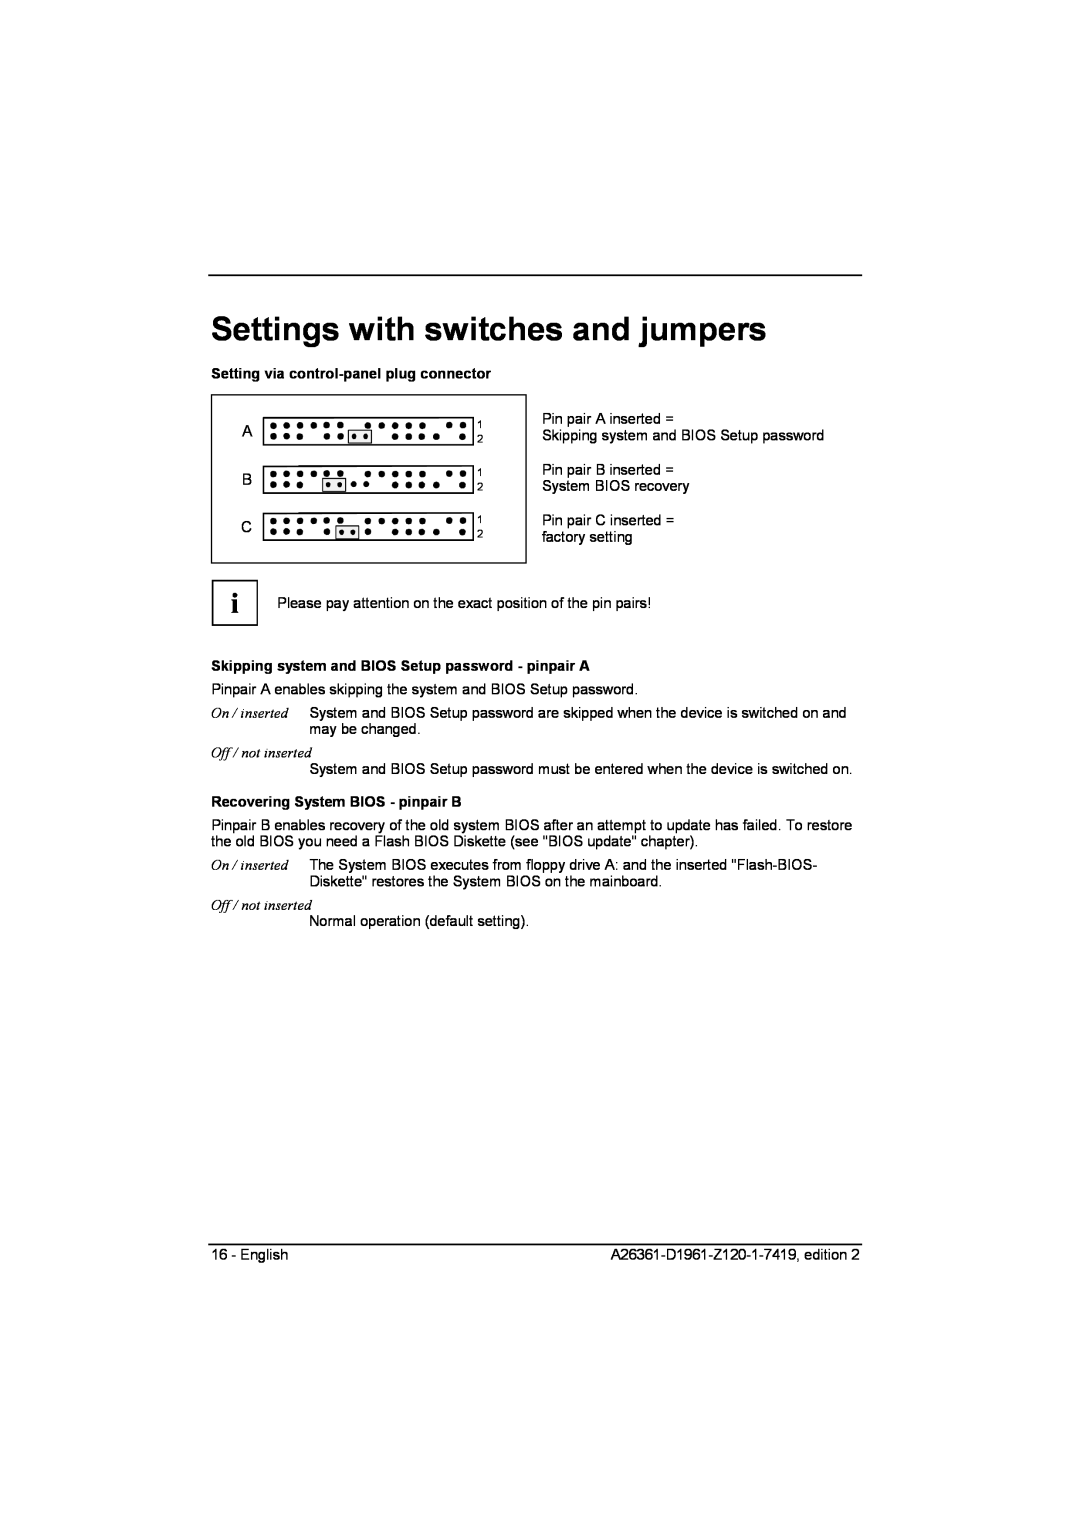 Fujitsu D1961 Settings with switches and jumpers, Setting via control-panel plug connector, Off / not inserted 